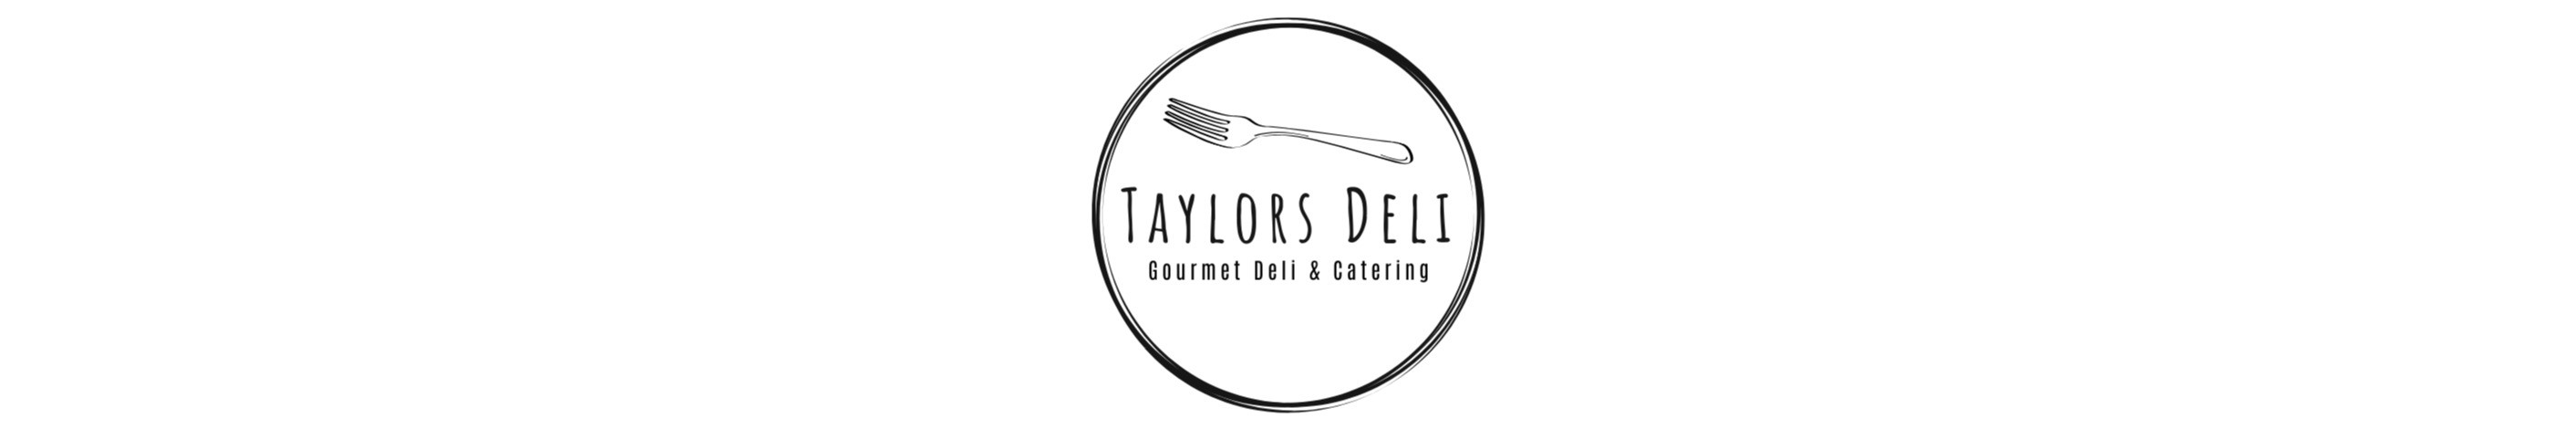 Gourmet Deli and catering services